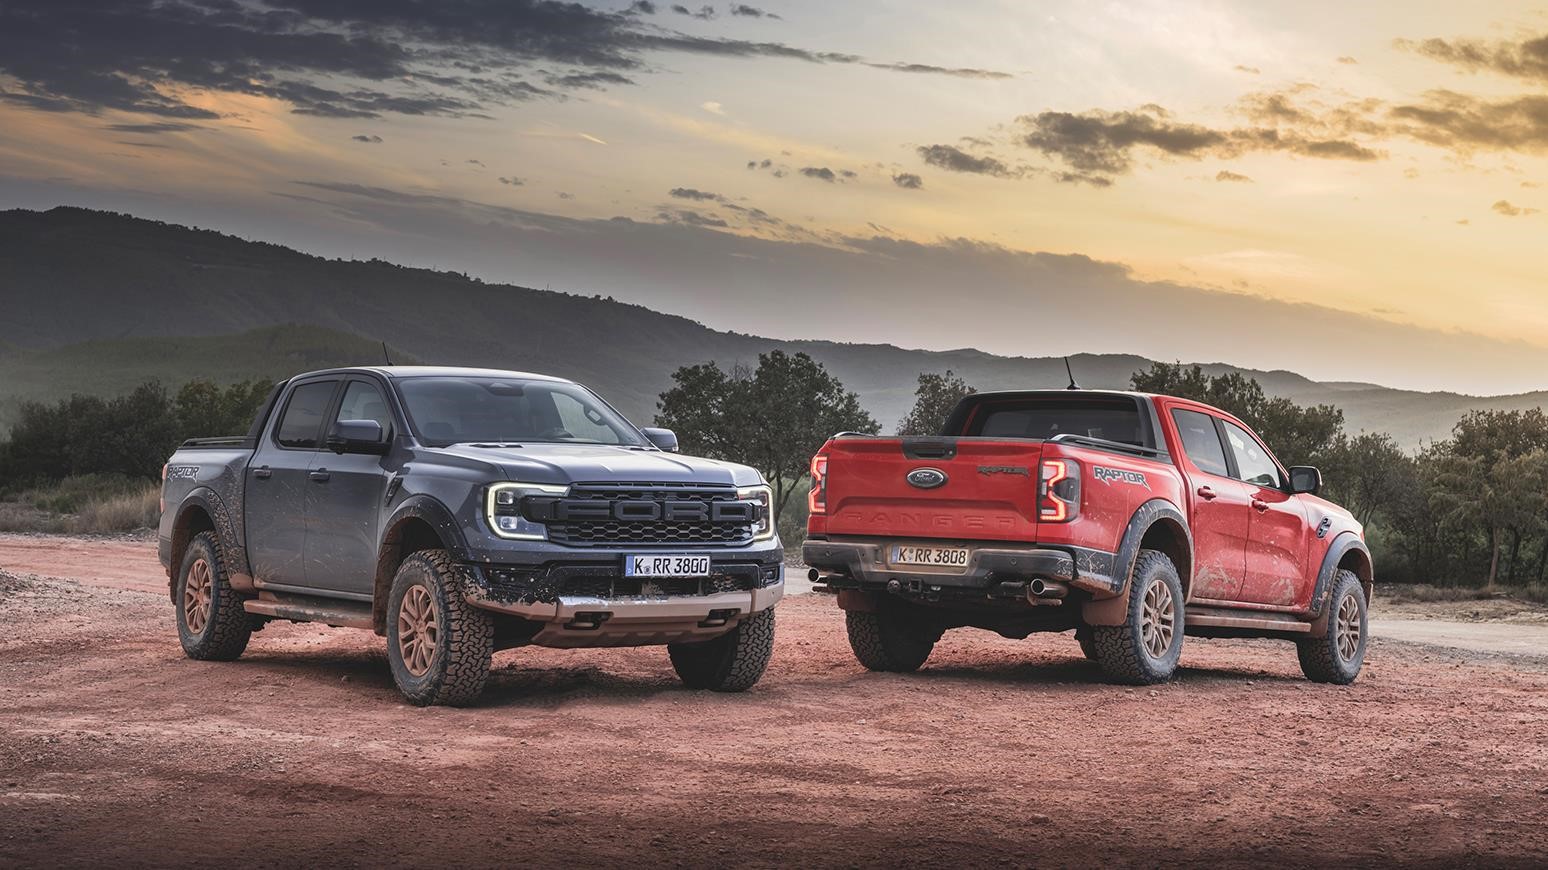 Ford Revamps Ranger Raptor Pickup With New Engine & Off-Road Running Gear